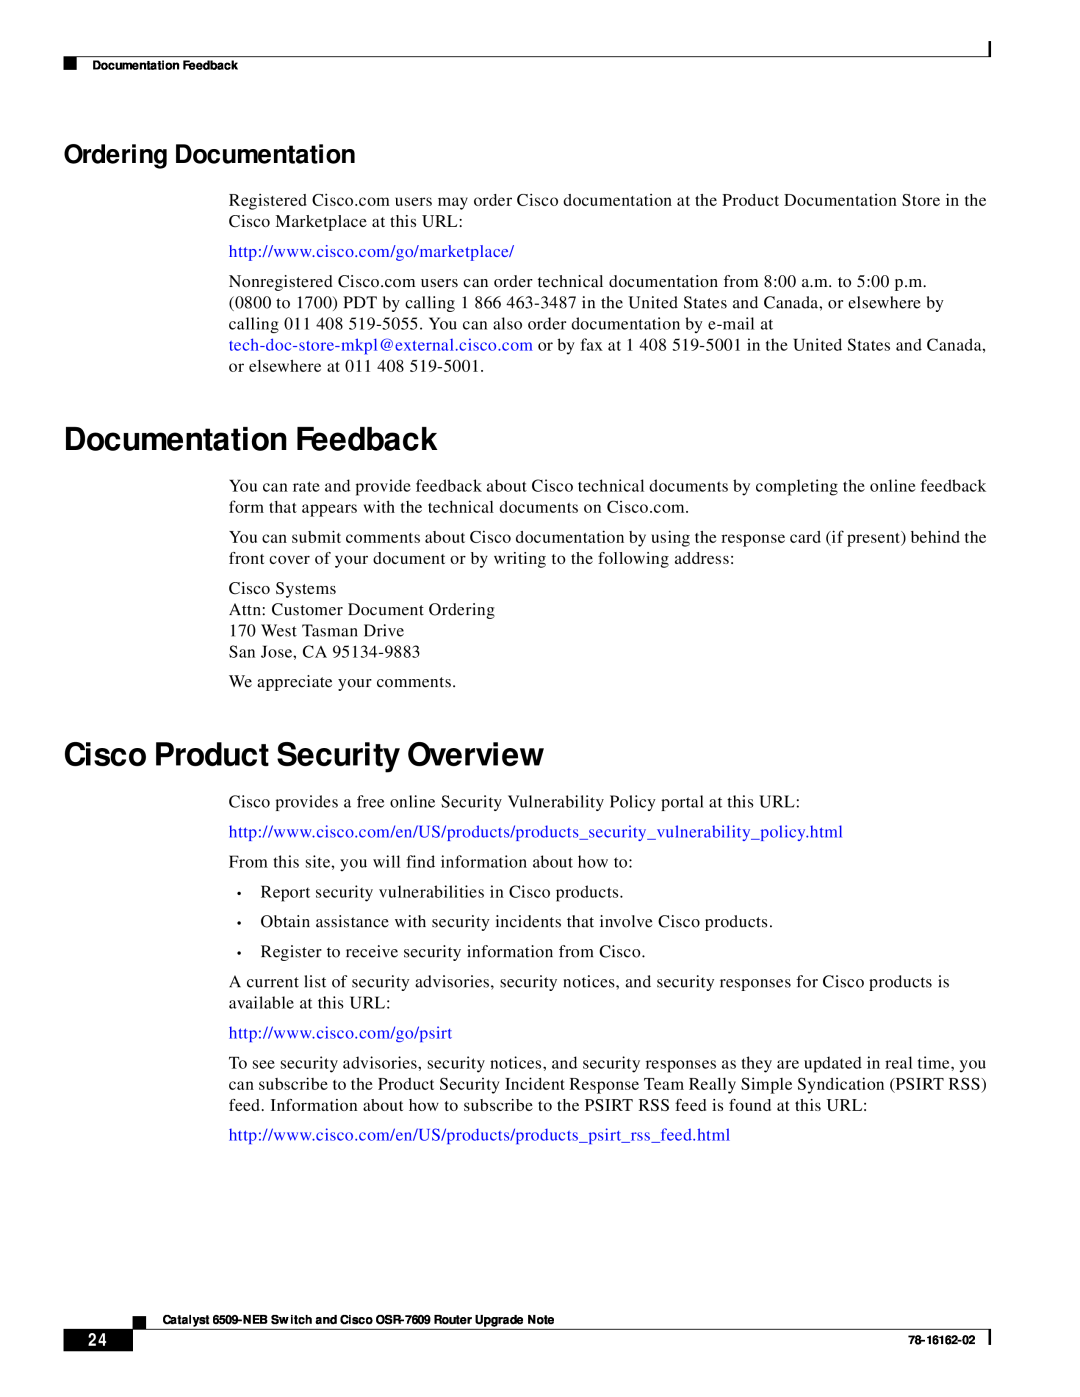 Cisco Systems 6509-NEB, OSR-7609 manual Documentation Feedback, Cisco Product Security Overview, Ordering Documentation 